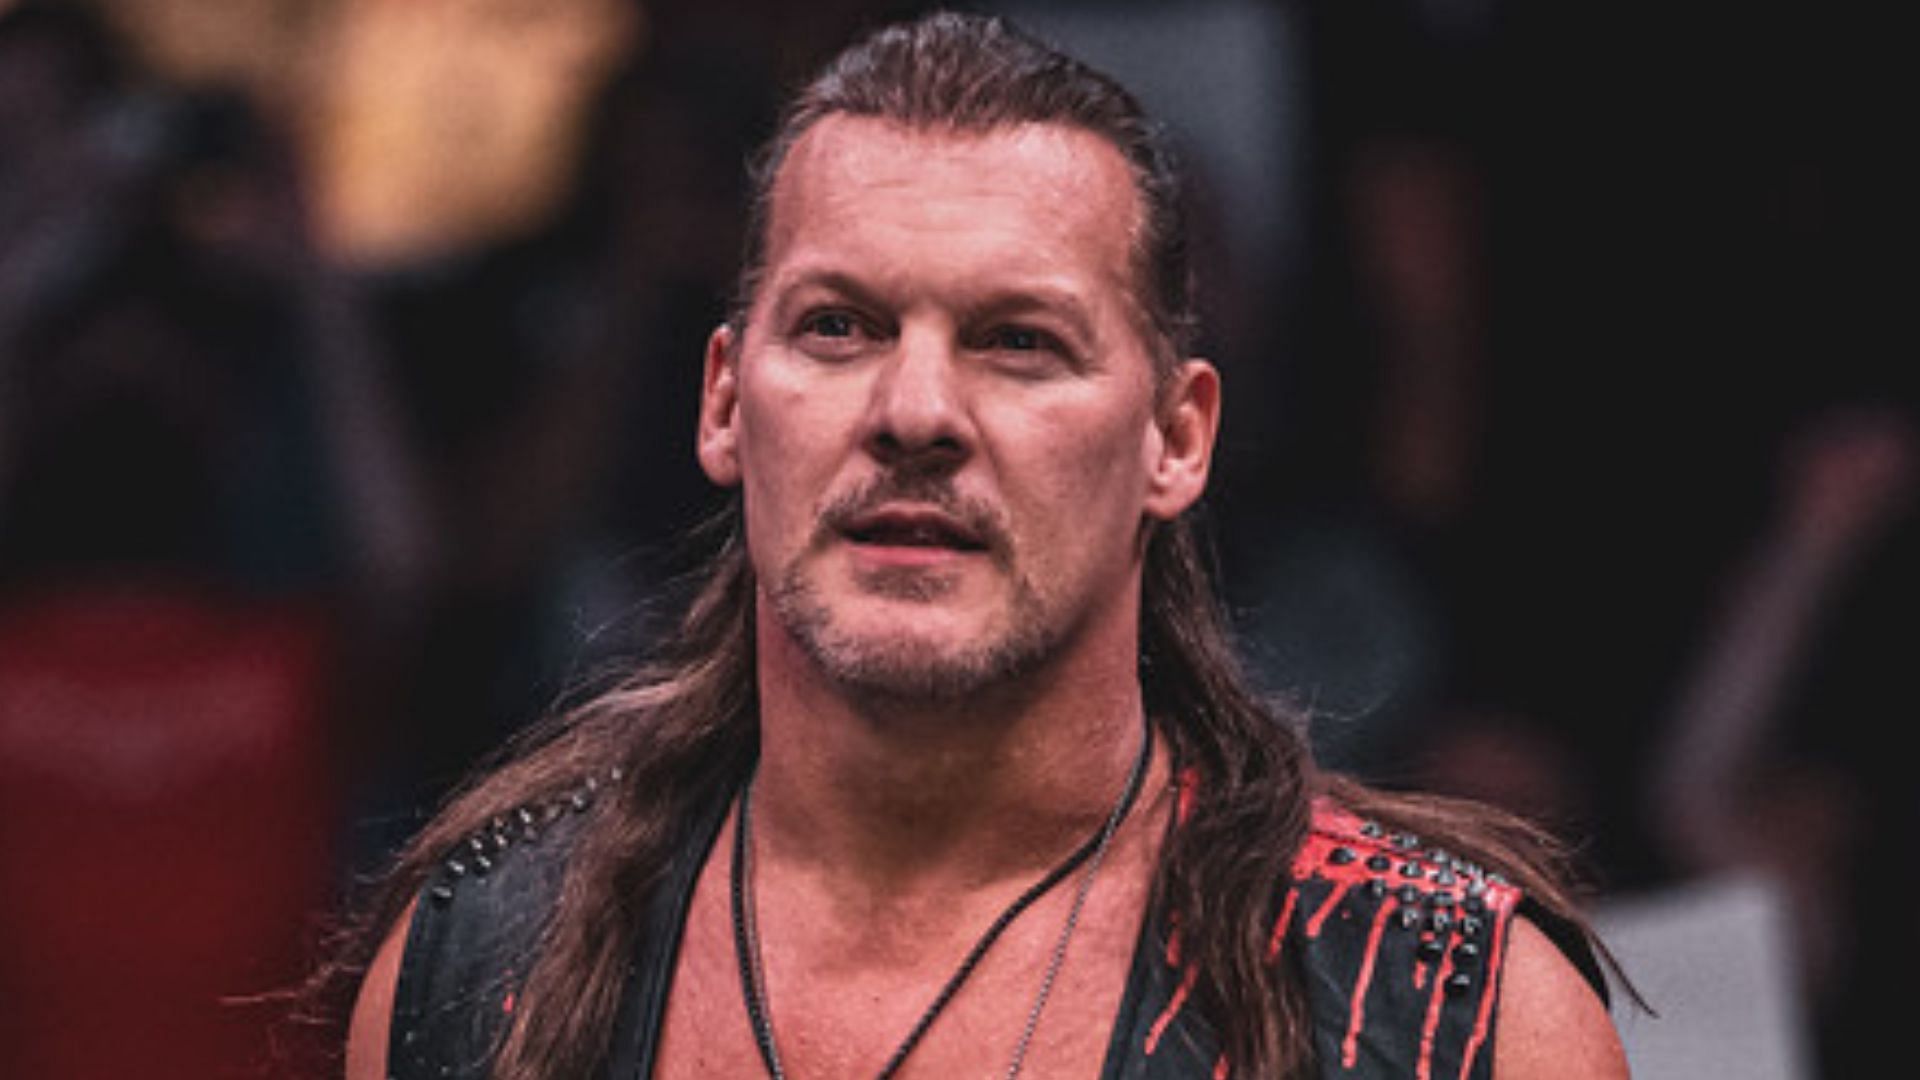 Chris Jericho has some kind words for another wrestling company